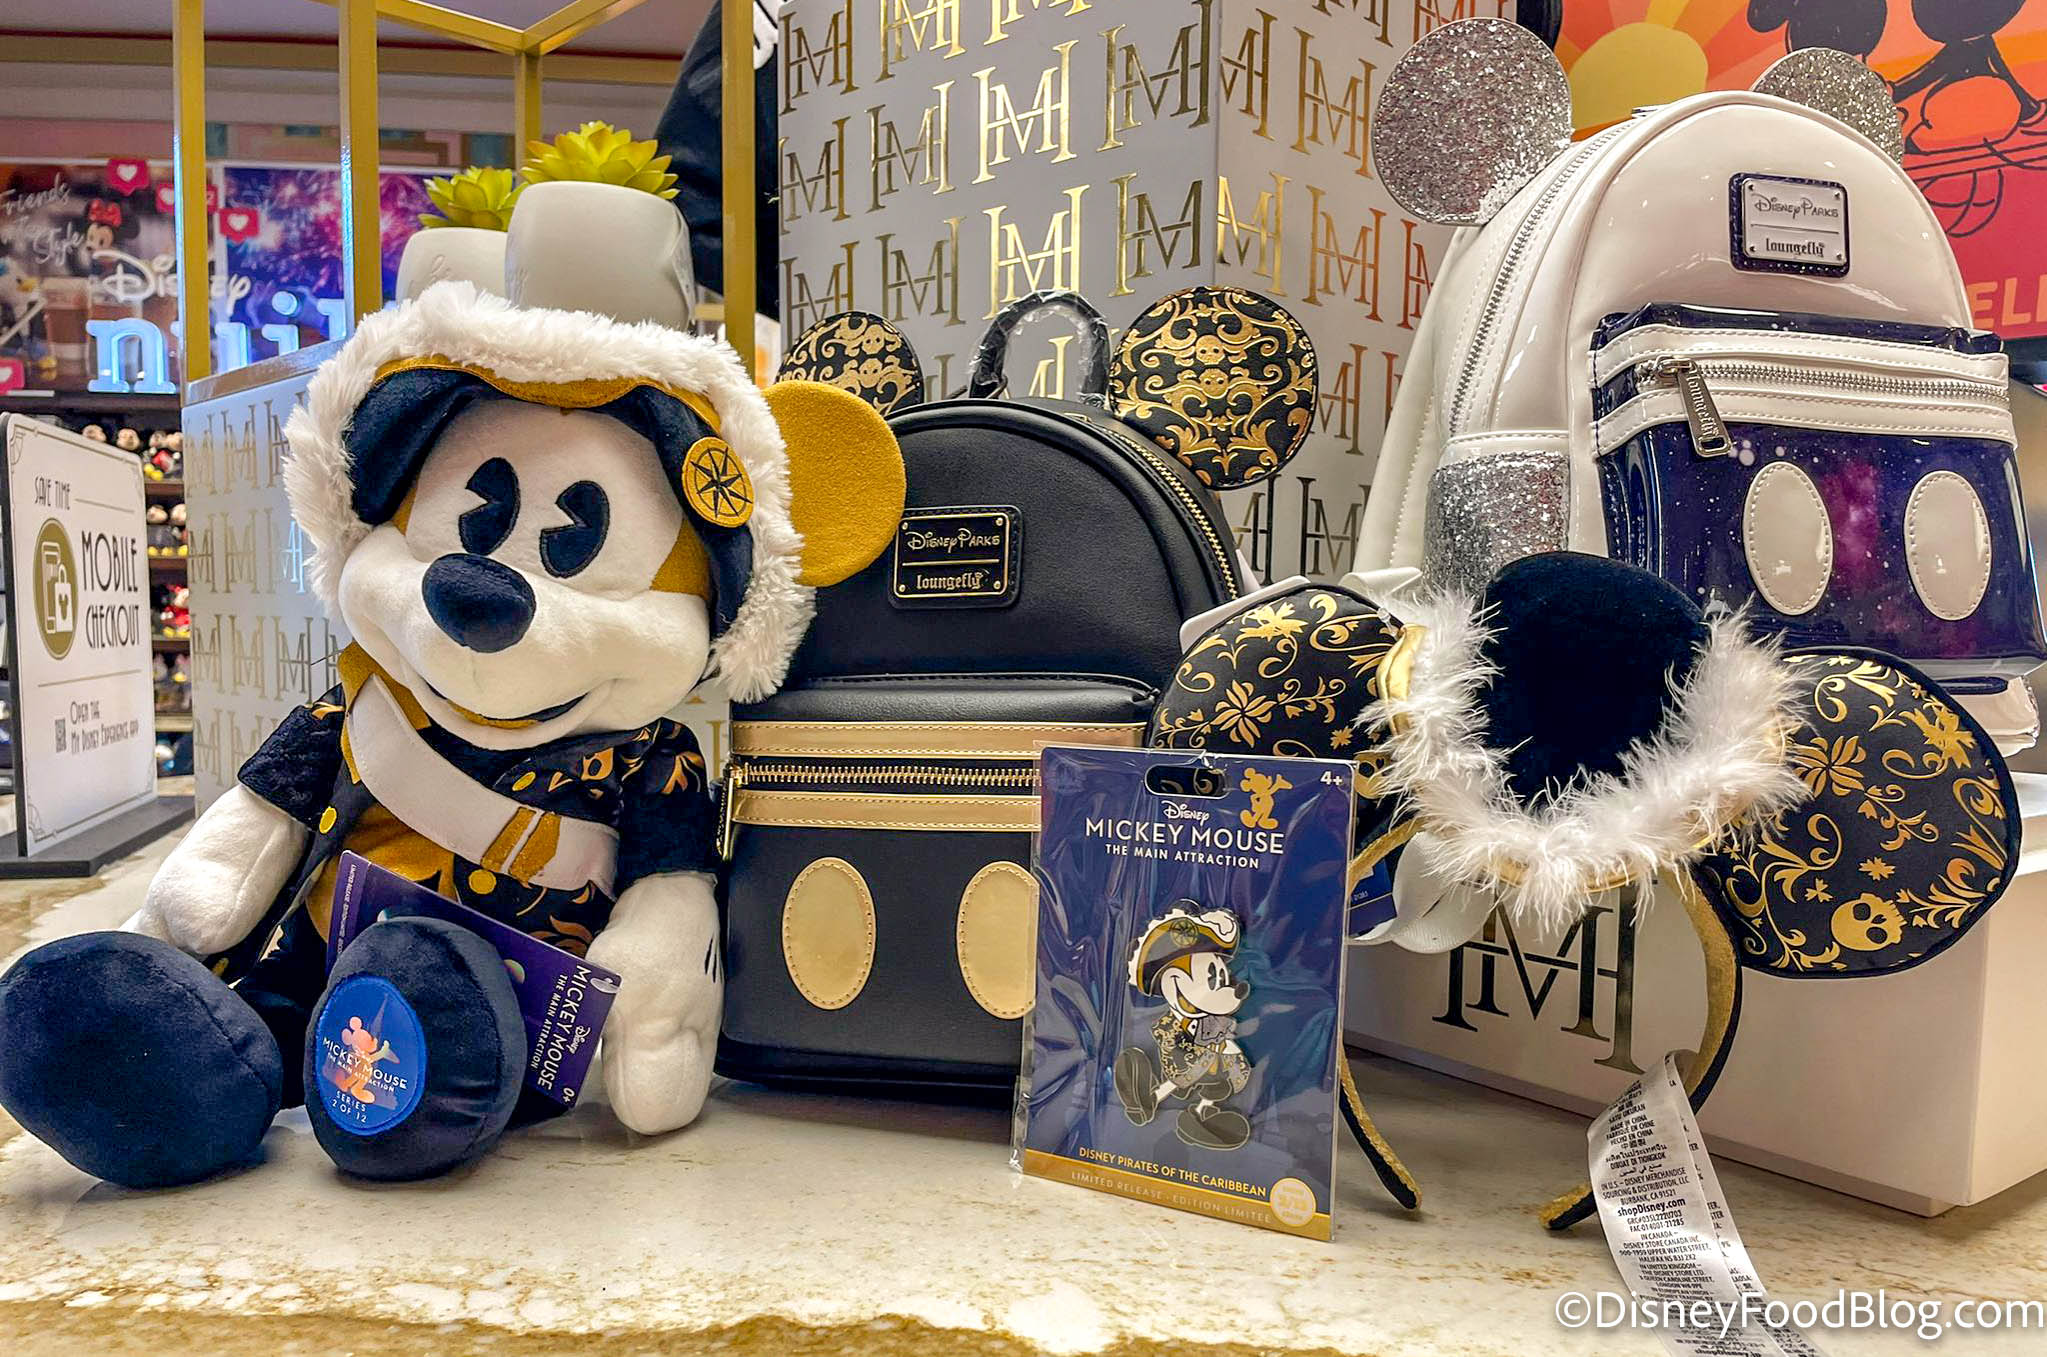 FIRST LOOK! The NEW Pirates of the Caribbean Merchandise Collection Has  Arrived in Disney World!